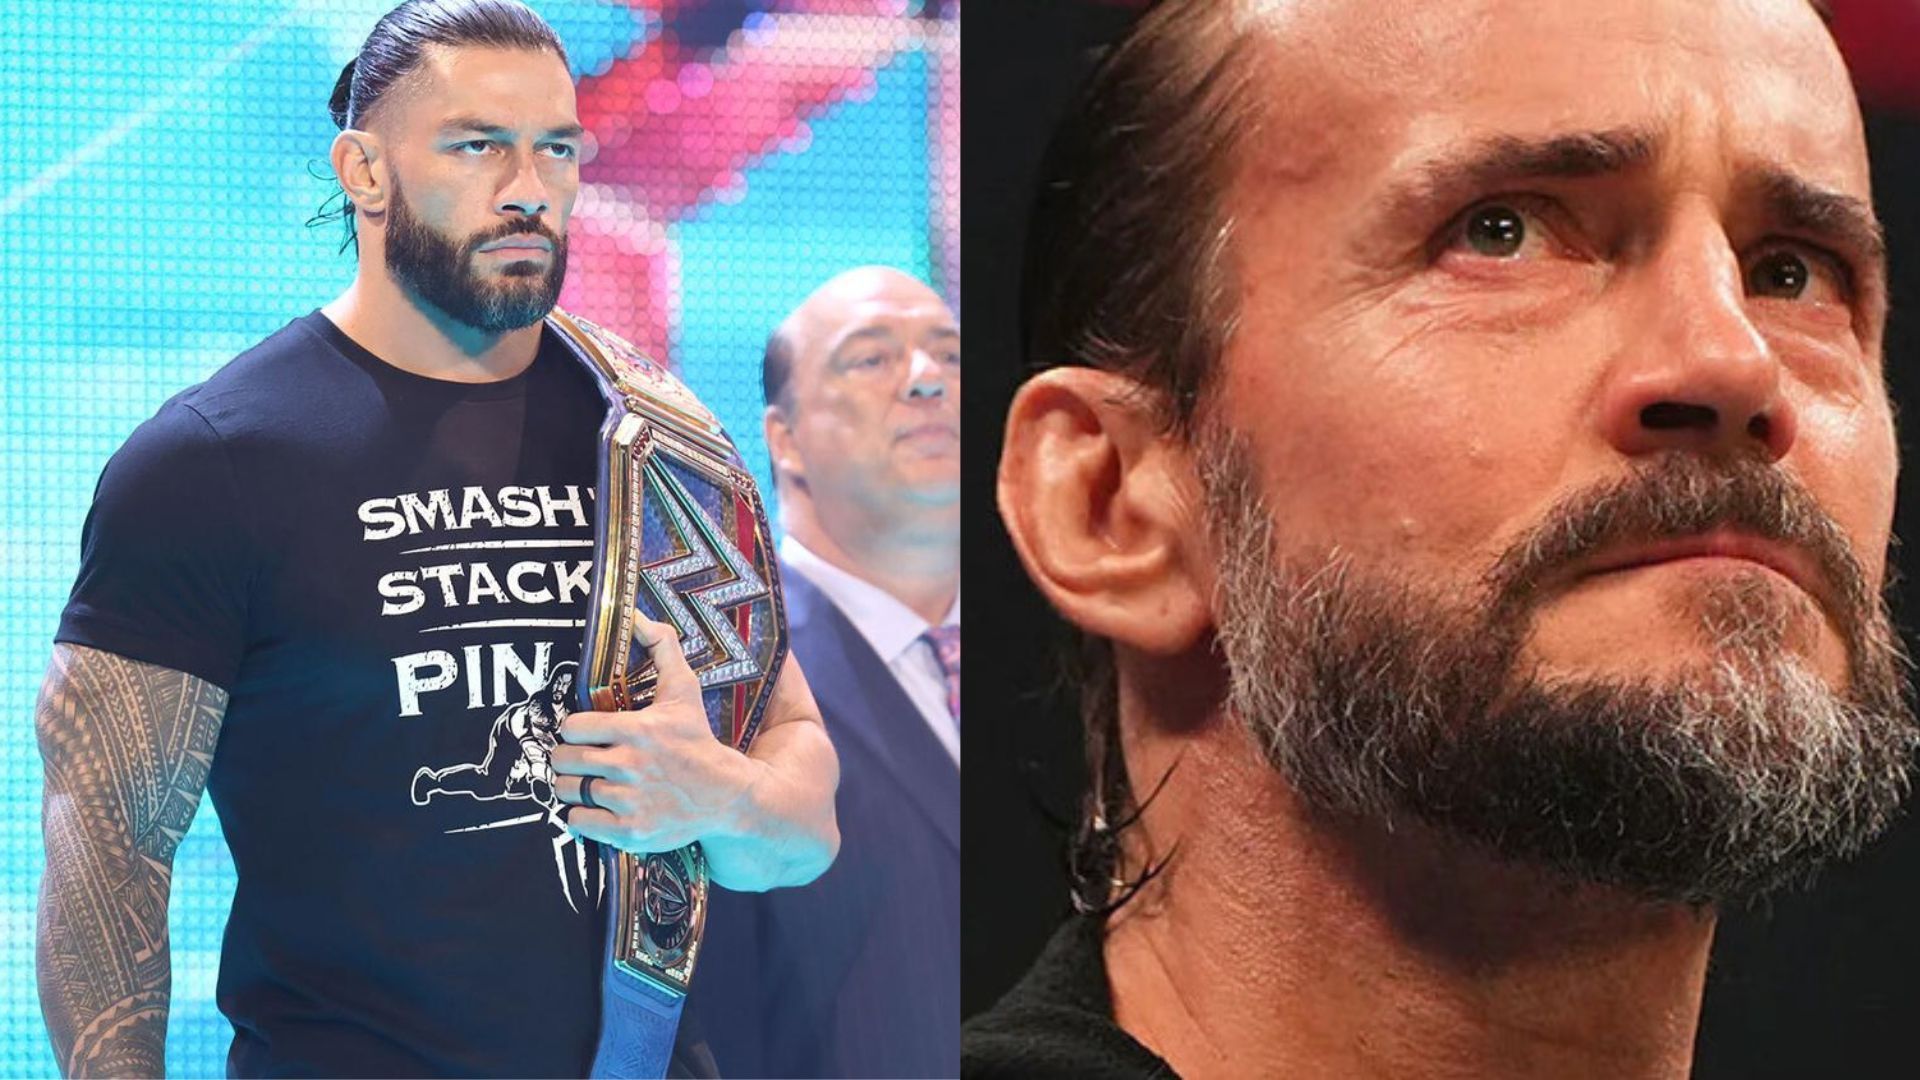 Wrestling fans on Twitter want Roman Reigns to beat CM Punk in his final match